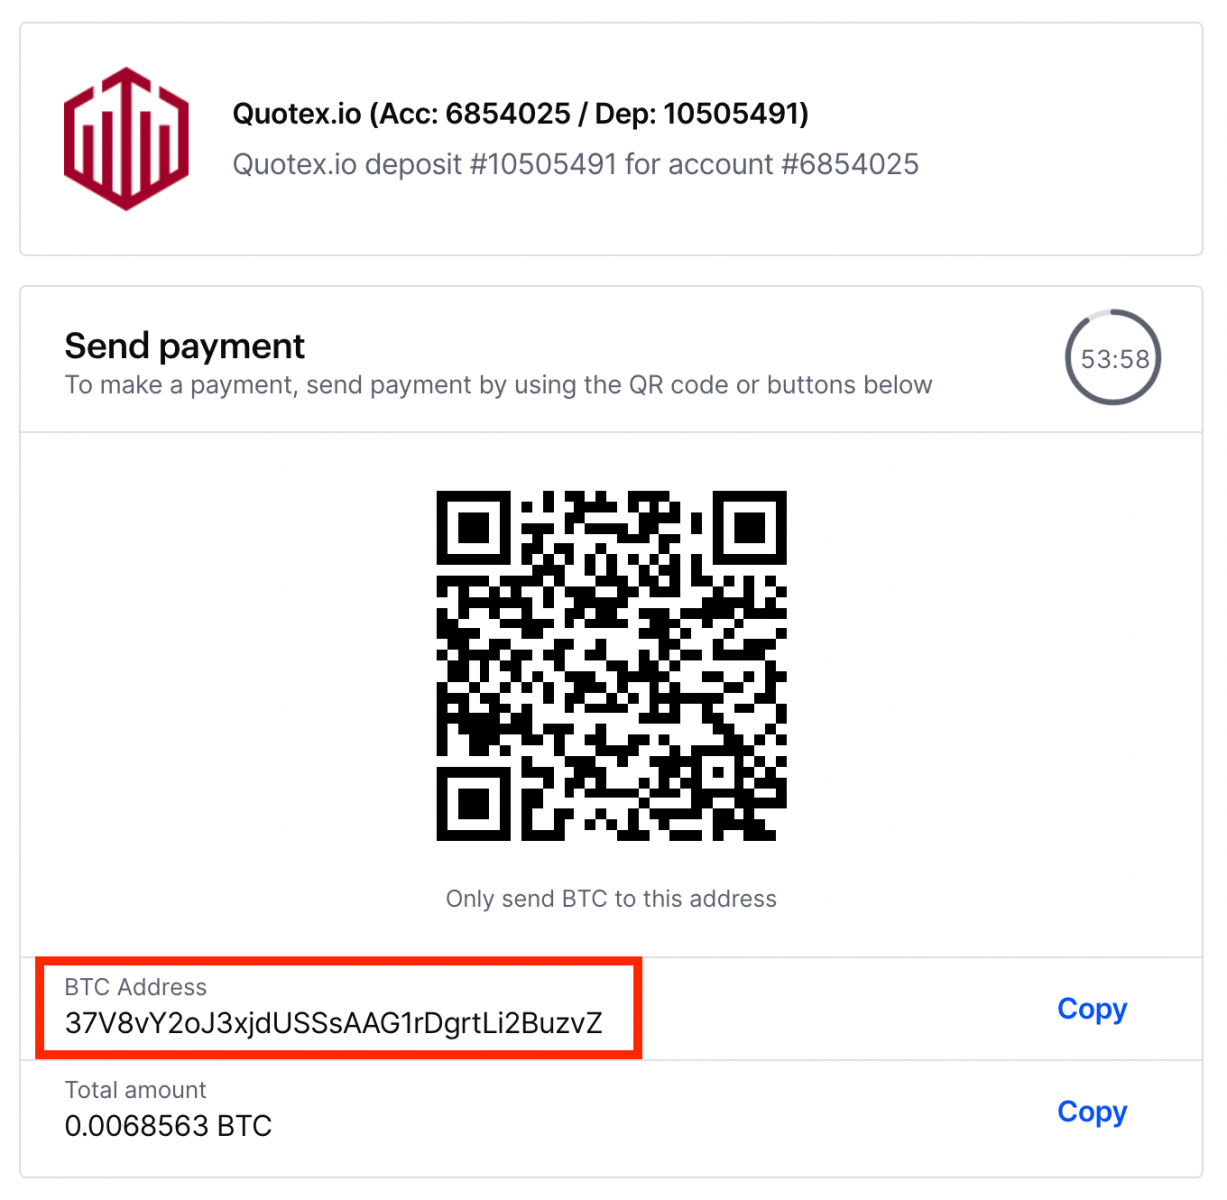 Deposit Money in Quotex via India Bank Cards (Visa / MasterCard / Debit Cards, RuPay), Net Banking, E-payments (Perfect Money, GlobePay, PayTM, Airtel Money, Ola, PhonePe, UPI, Mobikwik, Reliance Jio) and Cryptocurrencies